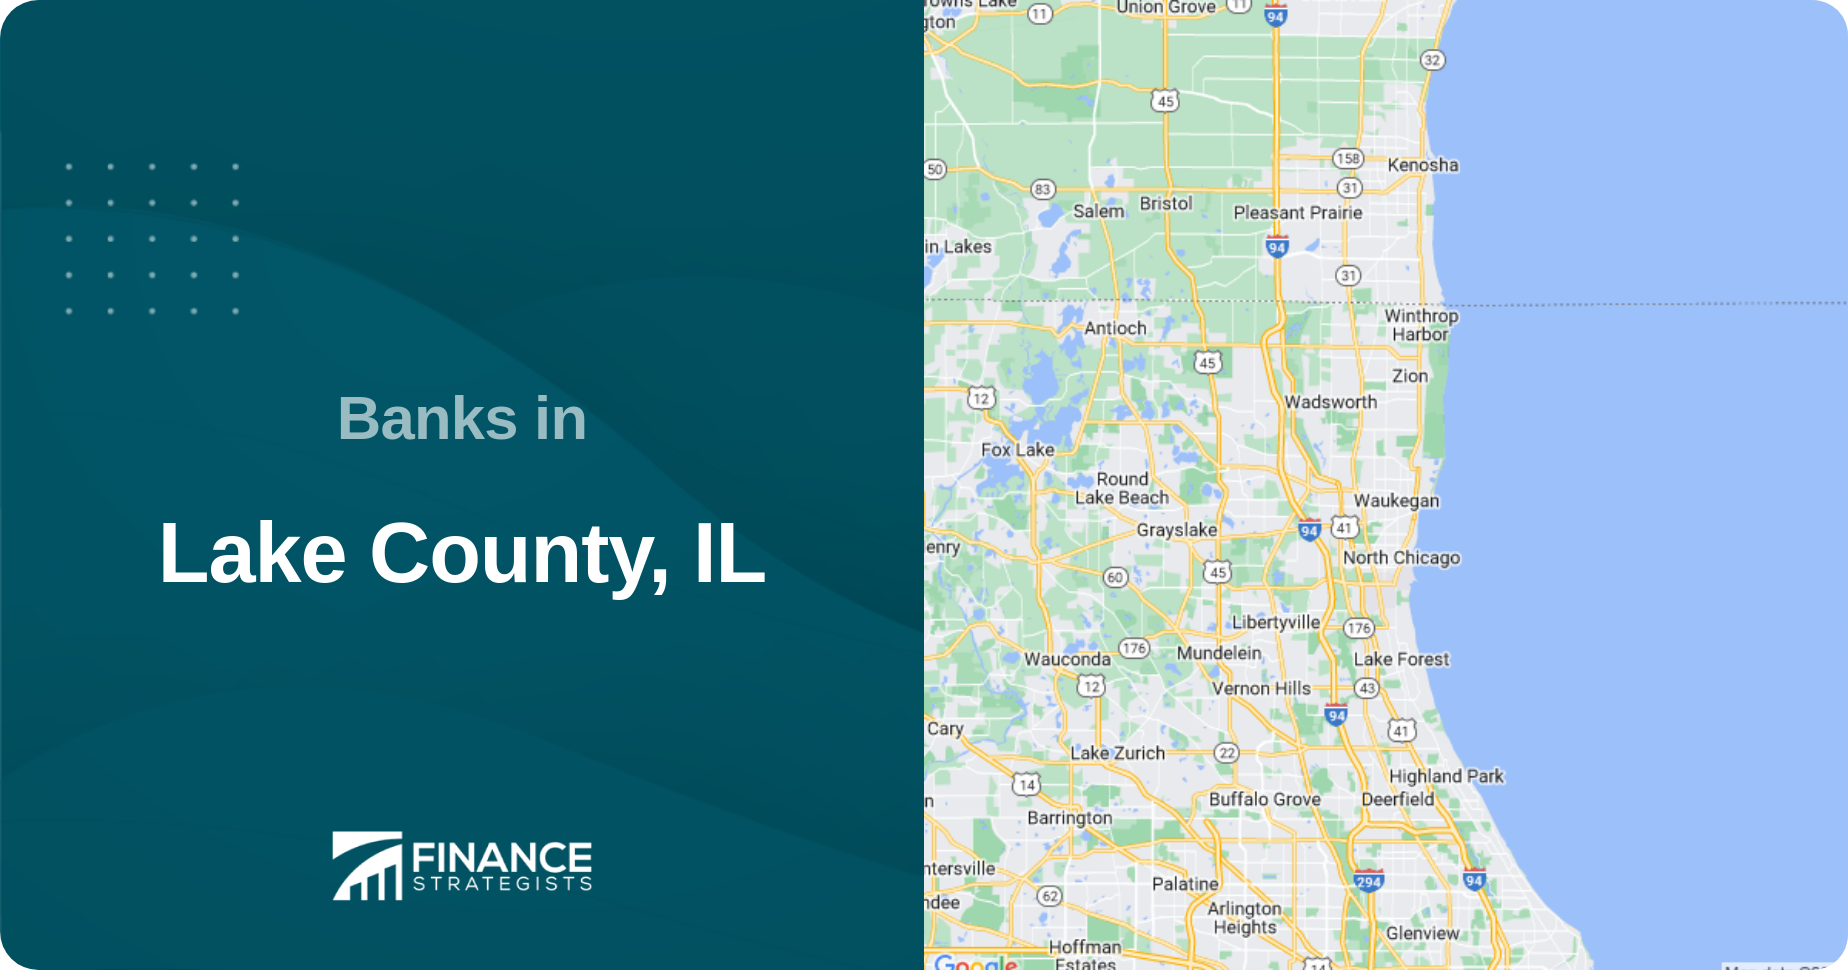 Banks in Lake County, IL